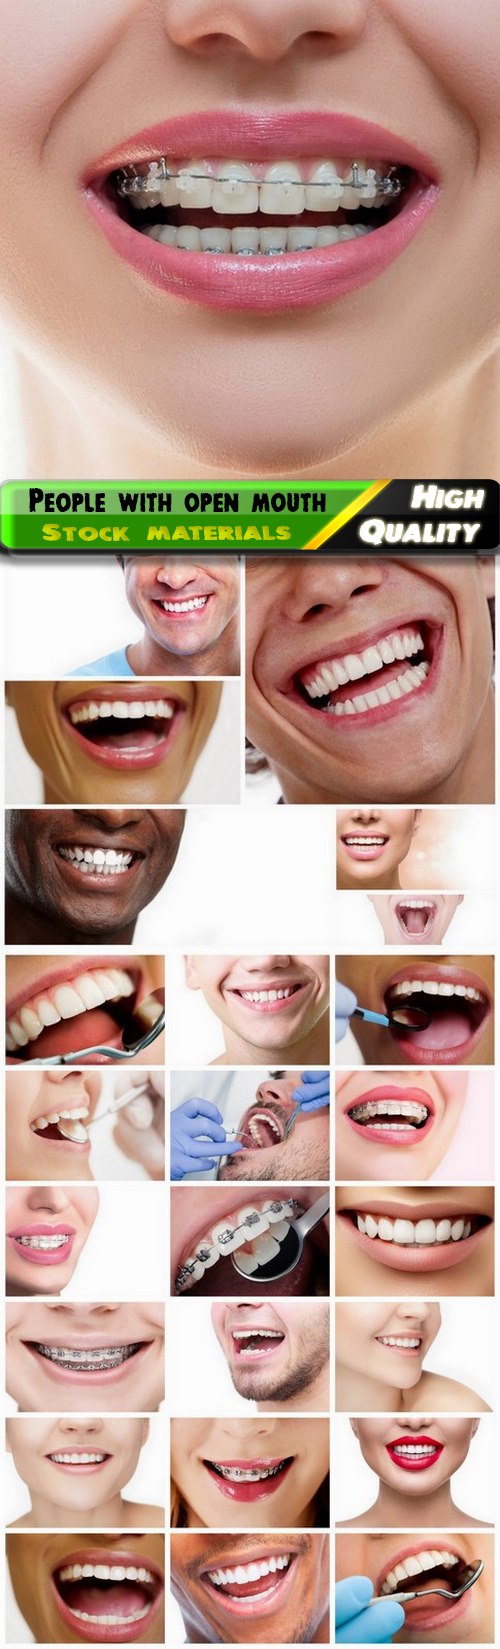 Woman and man with open mouth and healthy teeth - 25 HQ Jpg